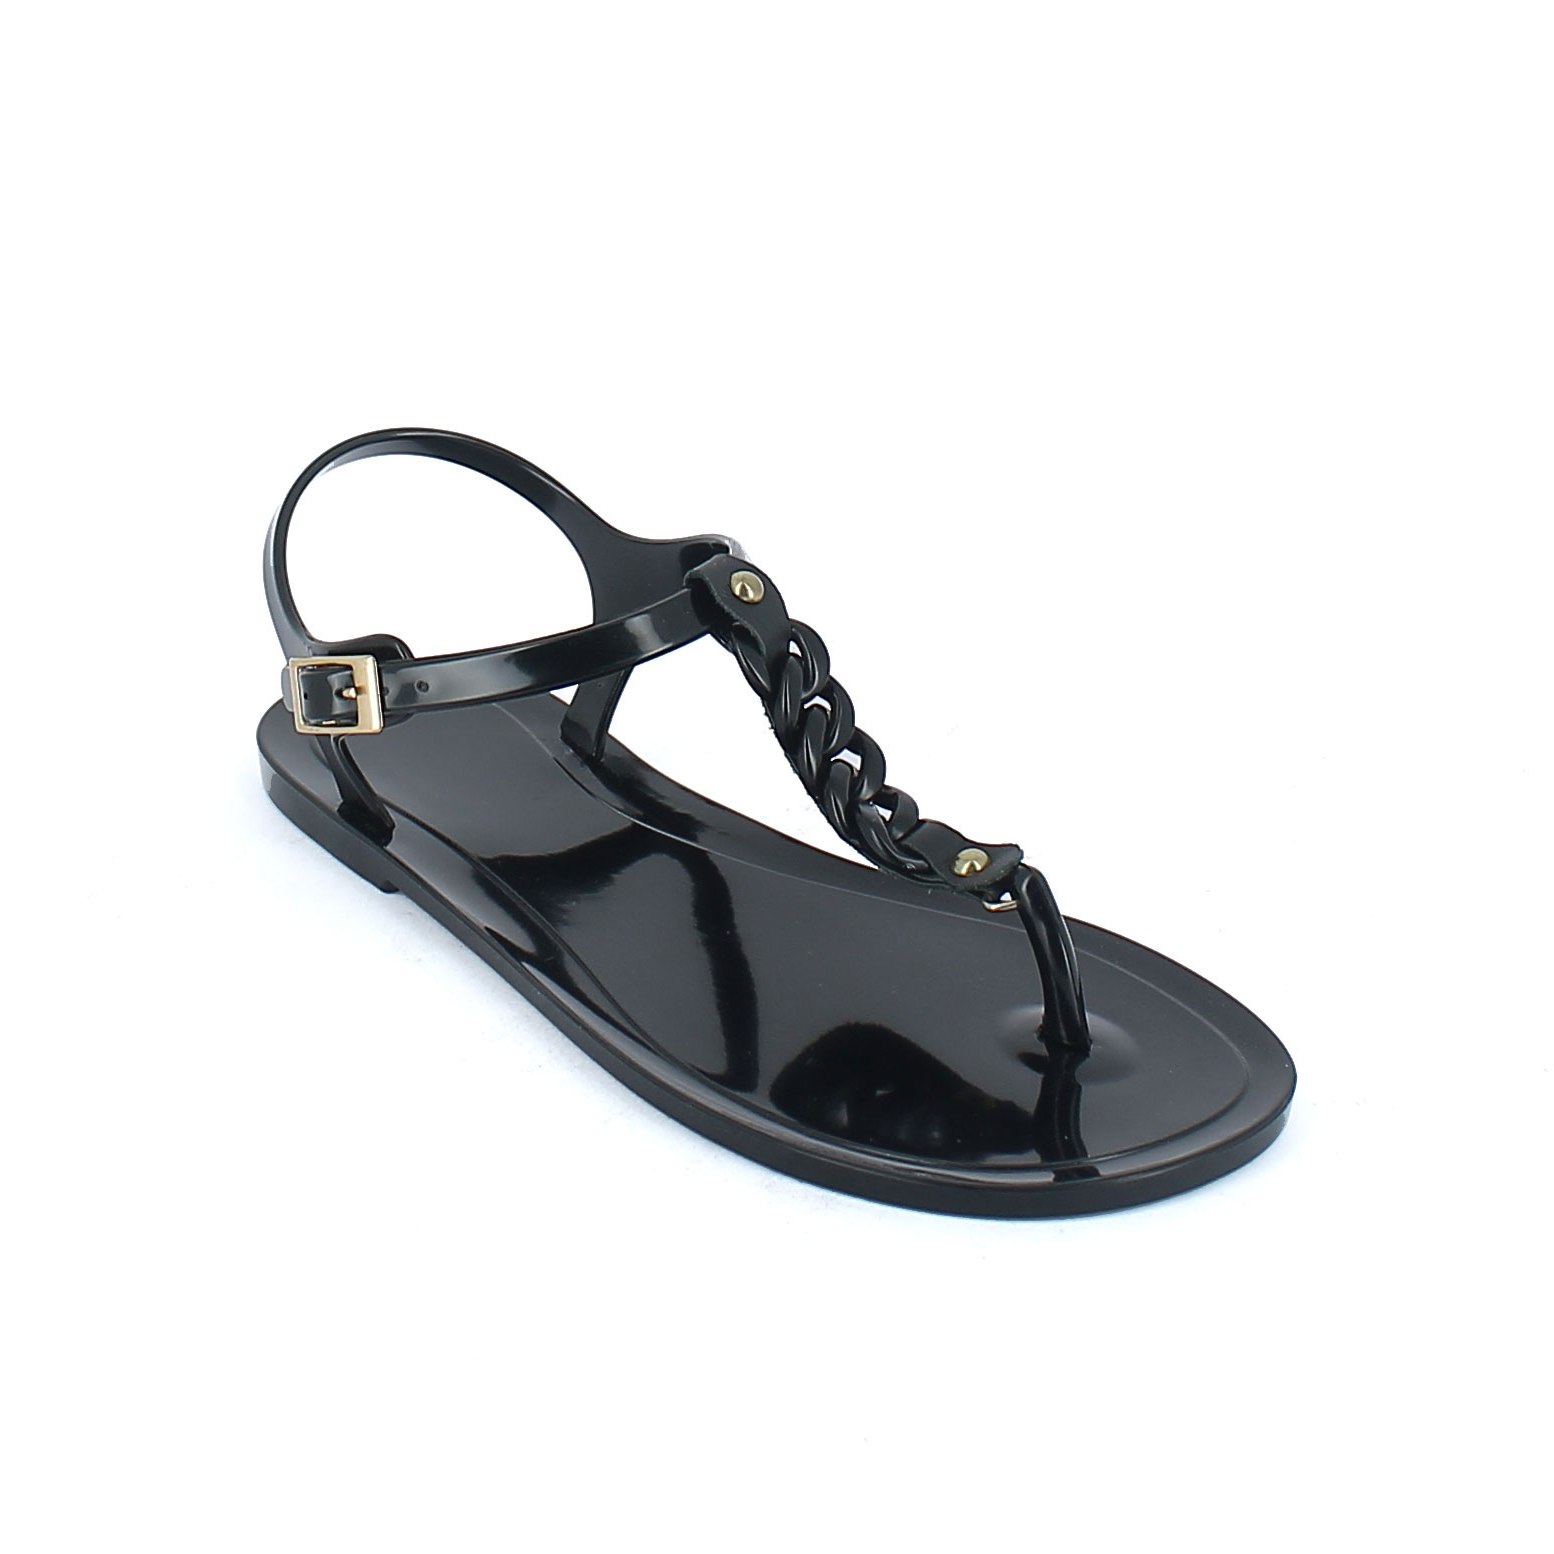 Solid colour bright finish pvc sandal with a small chain on the foot instep